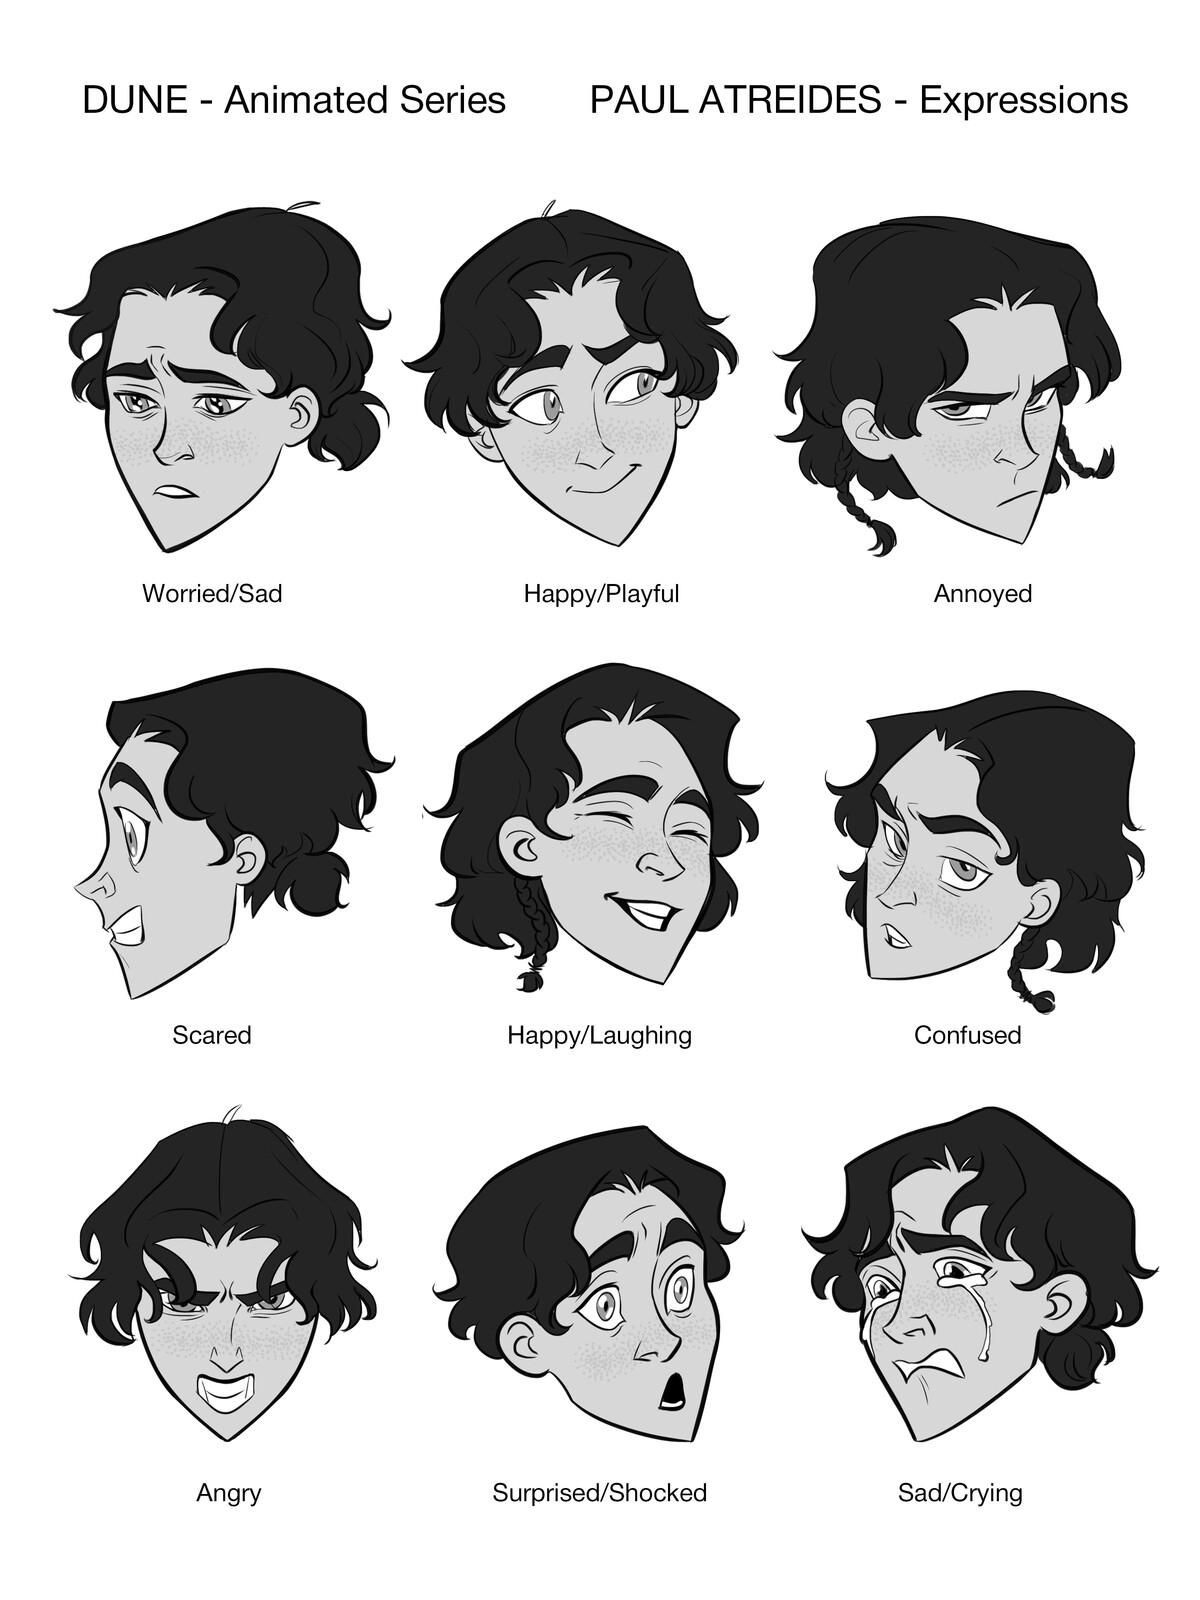 Continuing the work with character's head, I create an expression sheet as a reference point for animators.